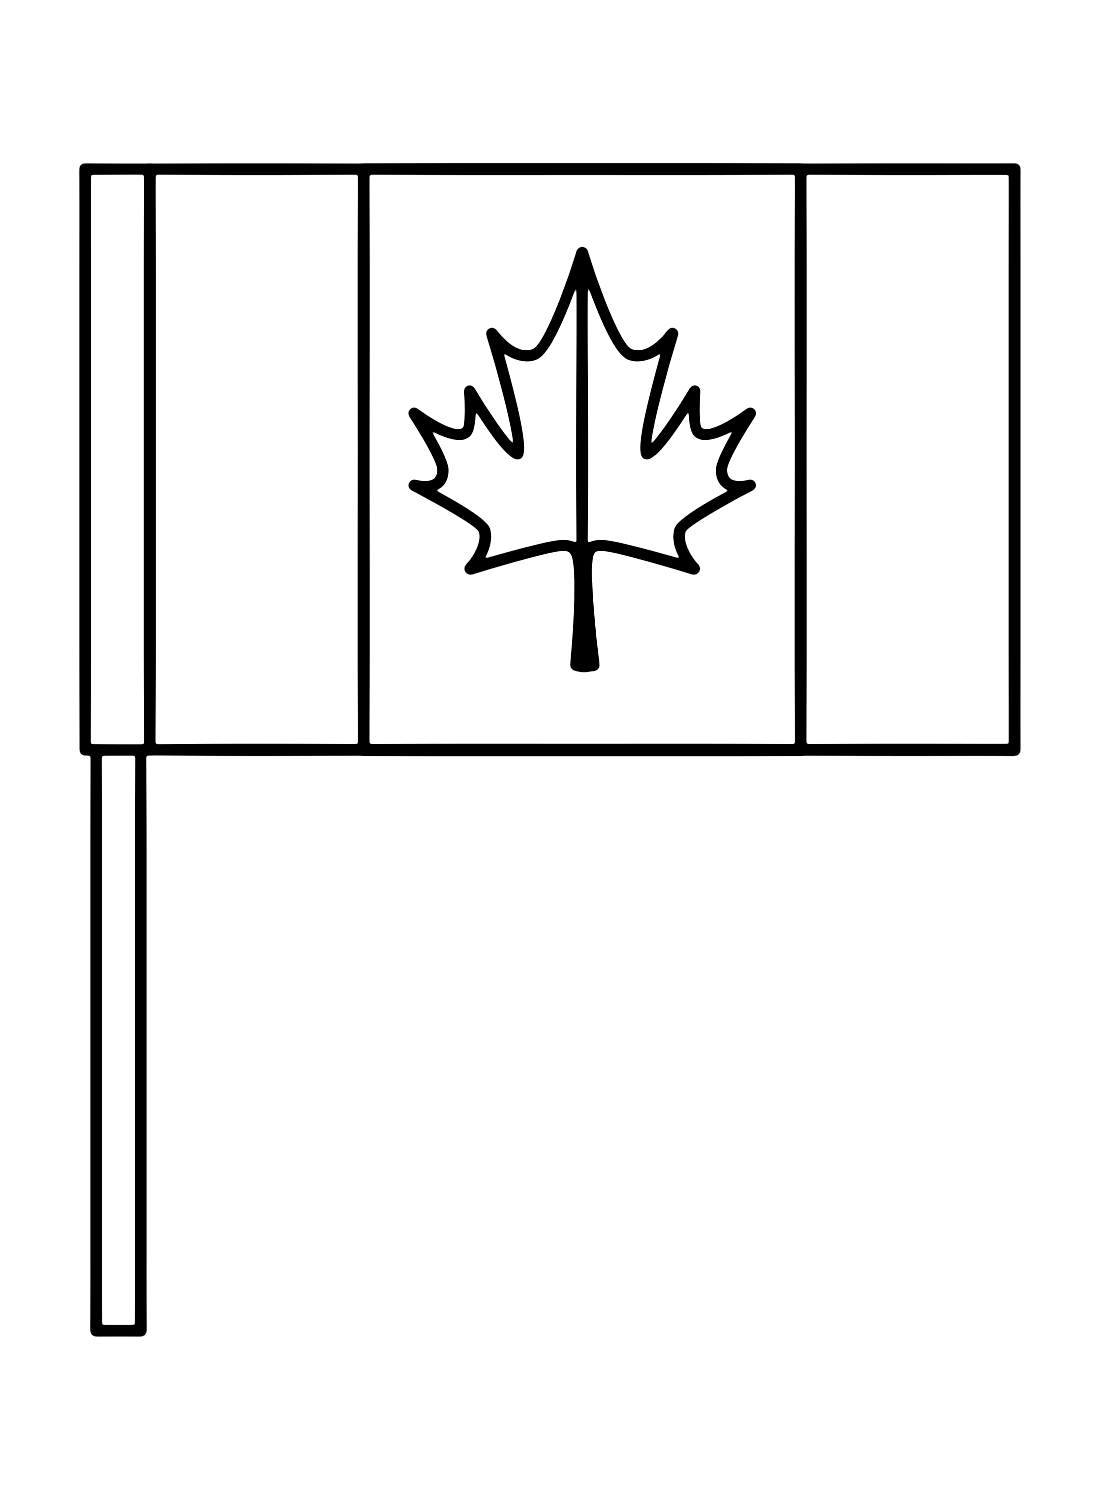 Canadian flag celebration day coloring page